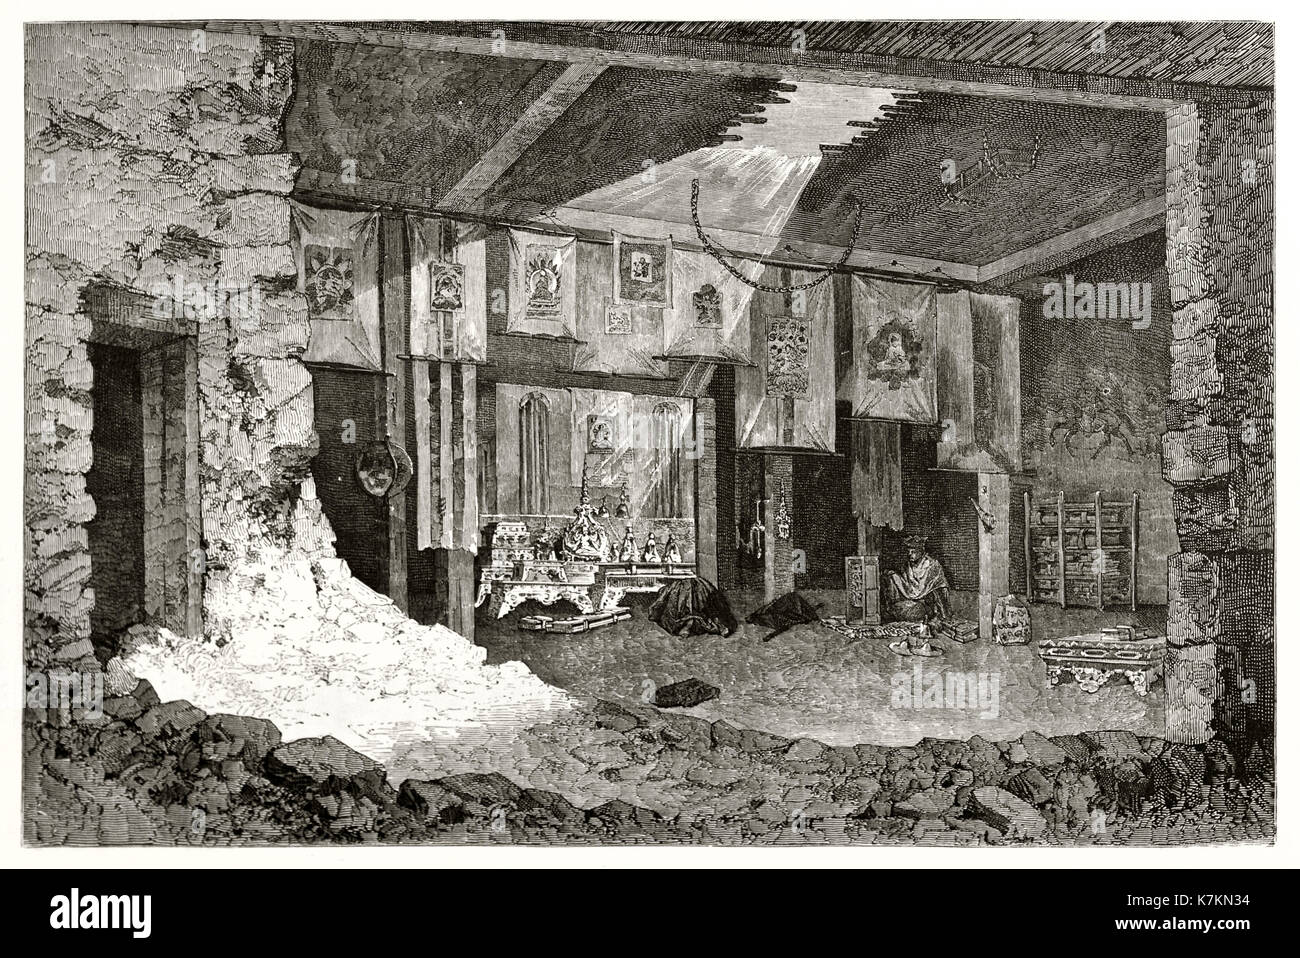 Old view of a Tibetan temple interior. By Therond after Schlagintweit, publ. on Le Tour du Monde, Paris, 1862 Stock Photo